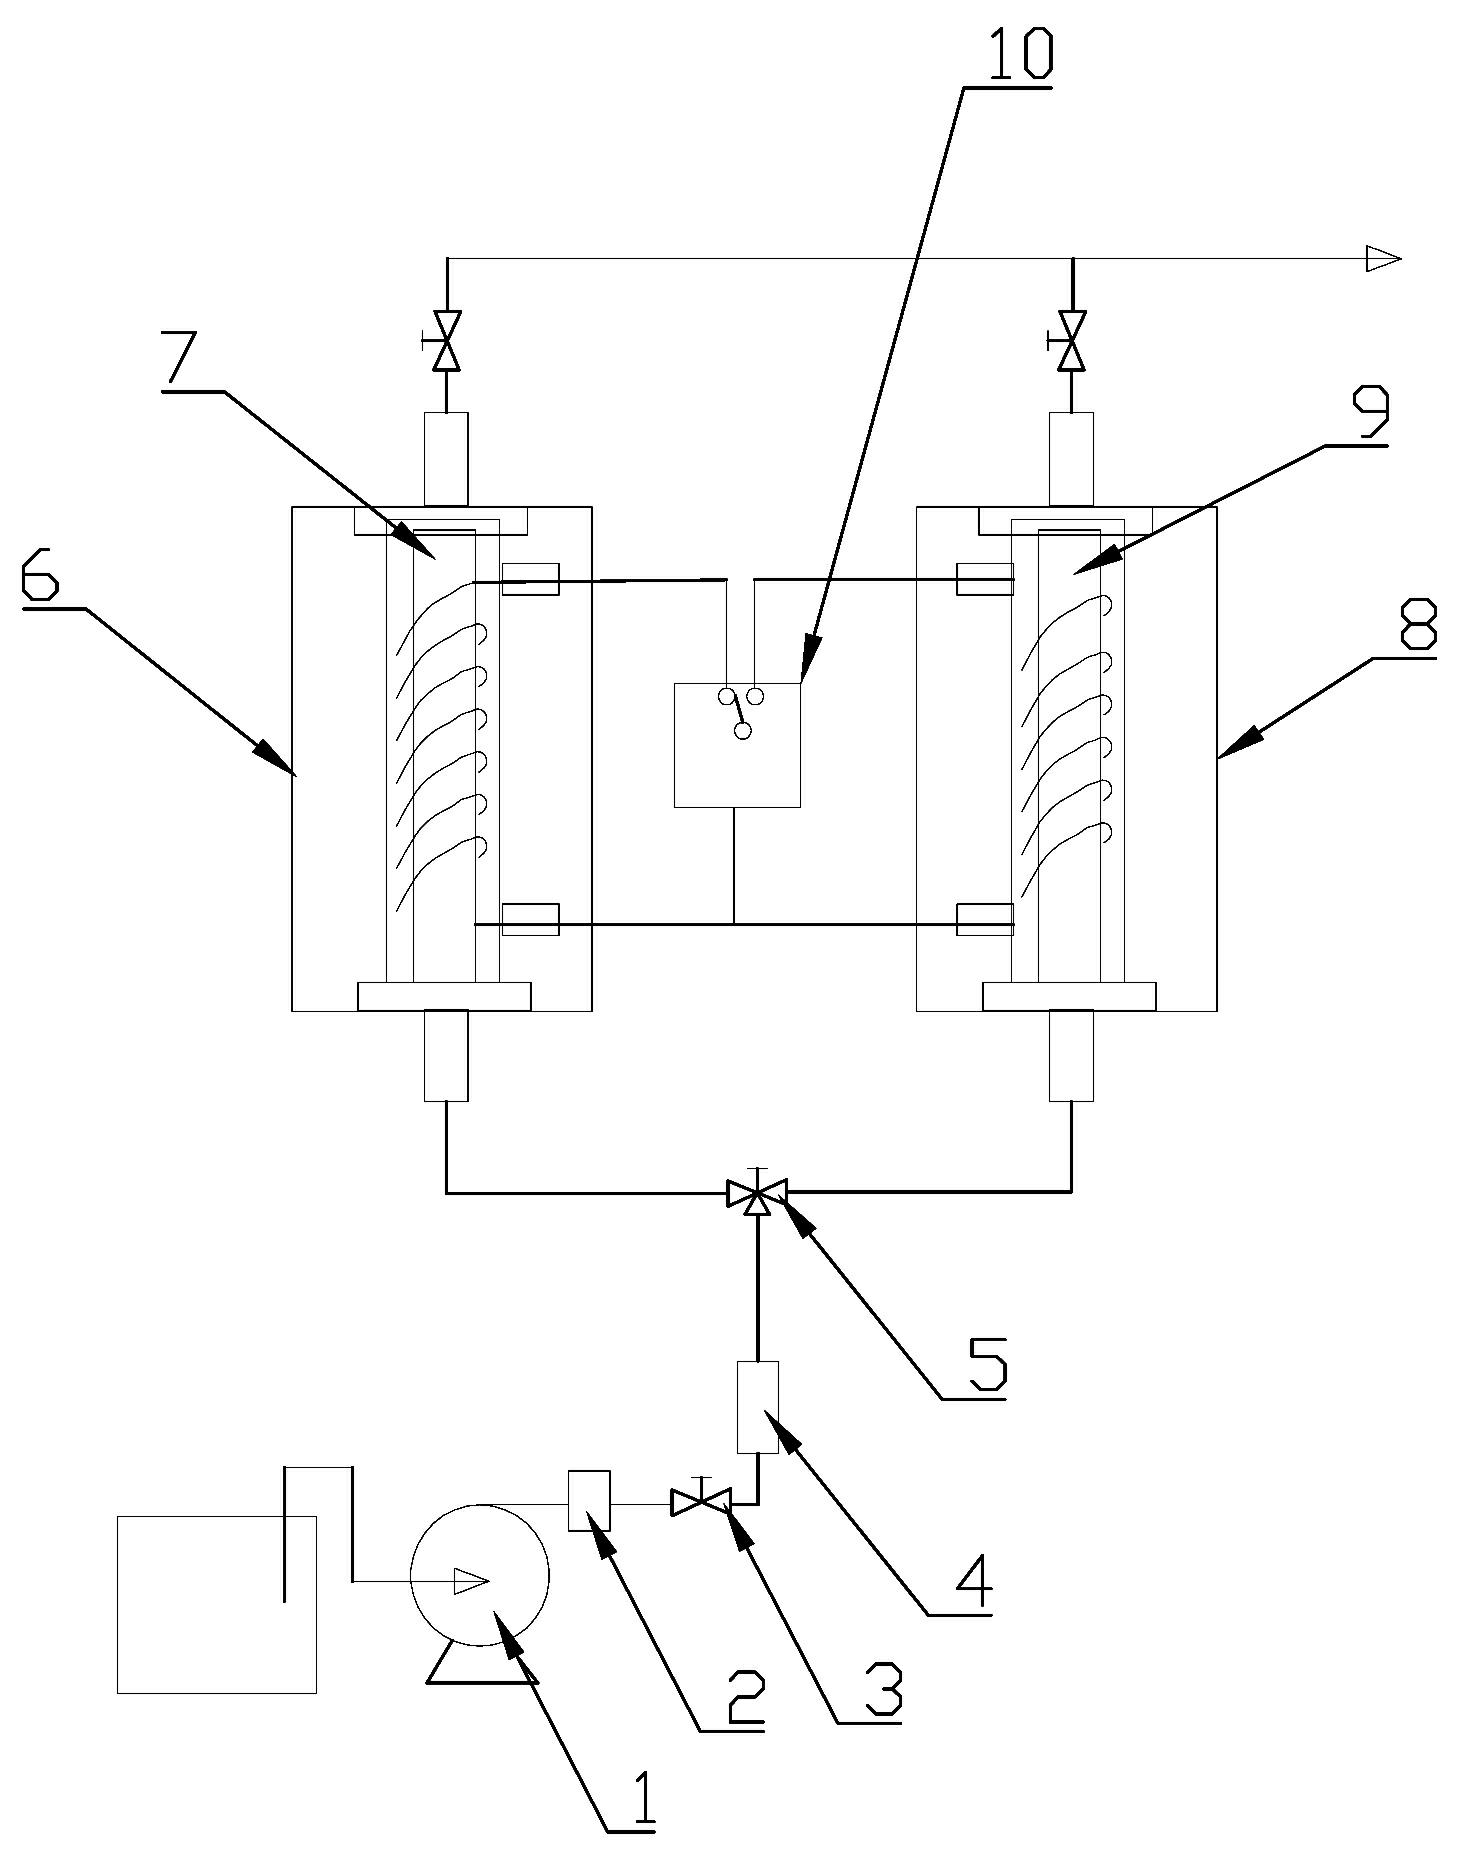 Removal method for organic pollutants based on microporous mineral absorption and coupling as well as microwave degradation